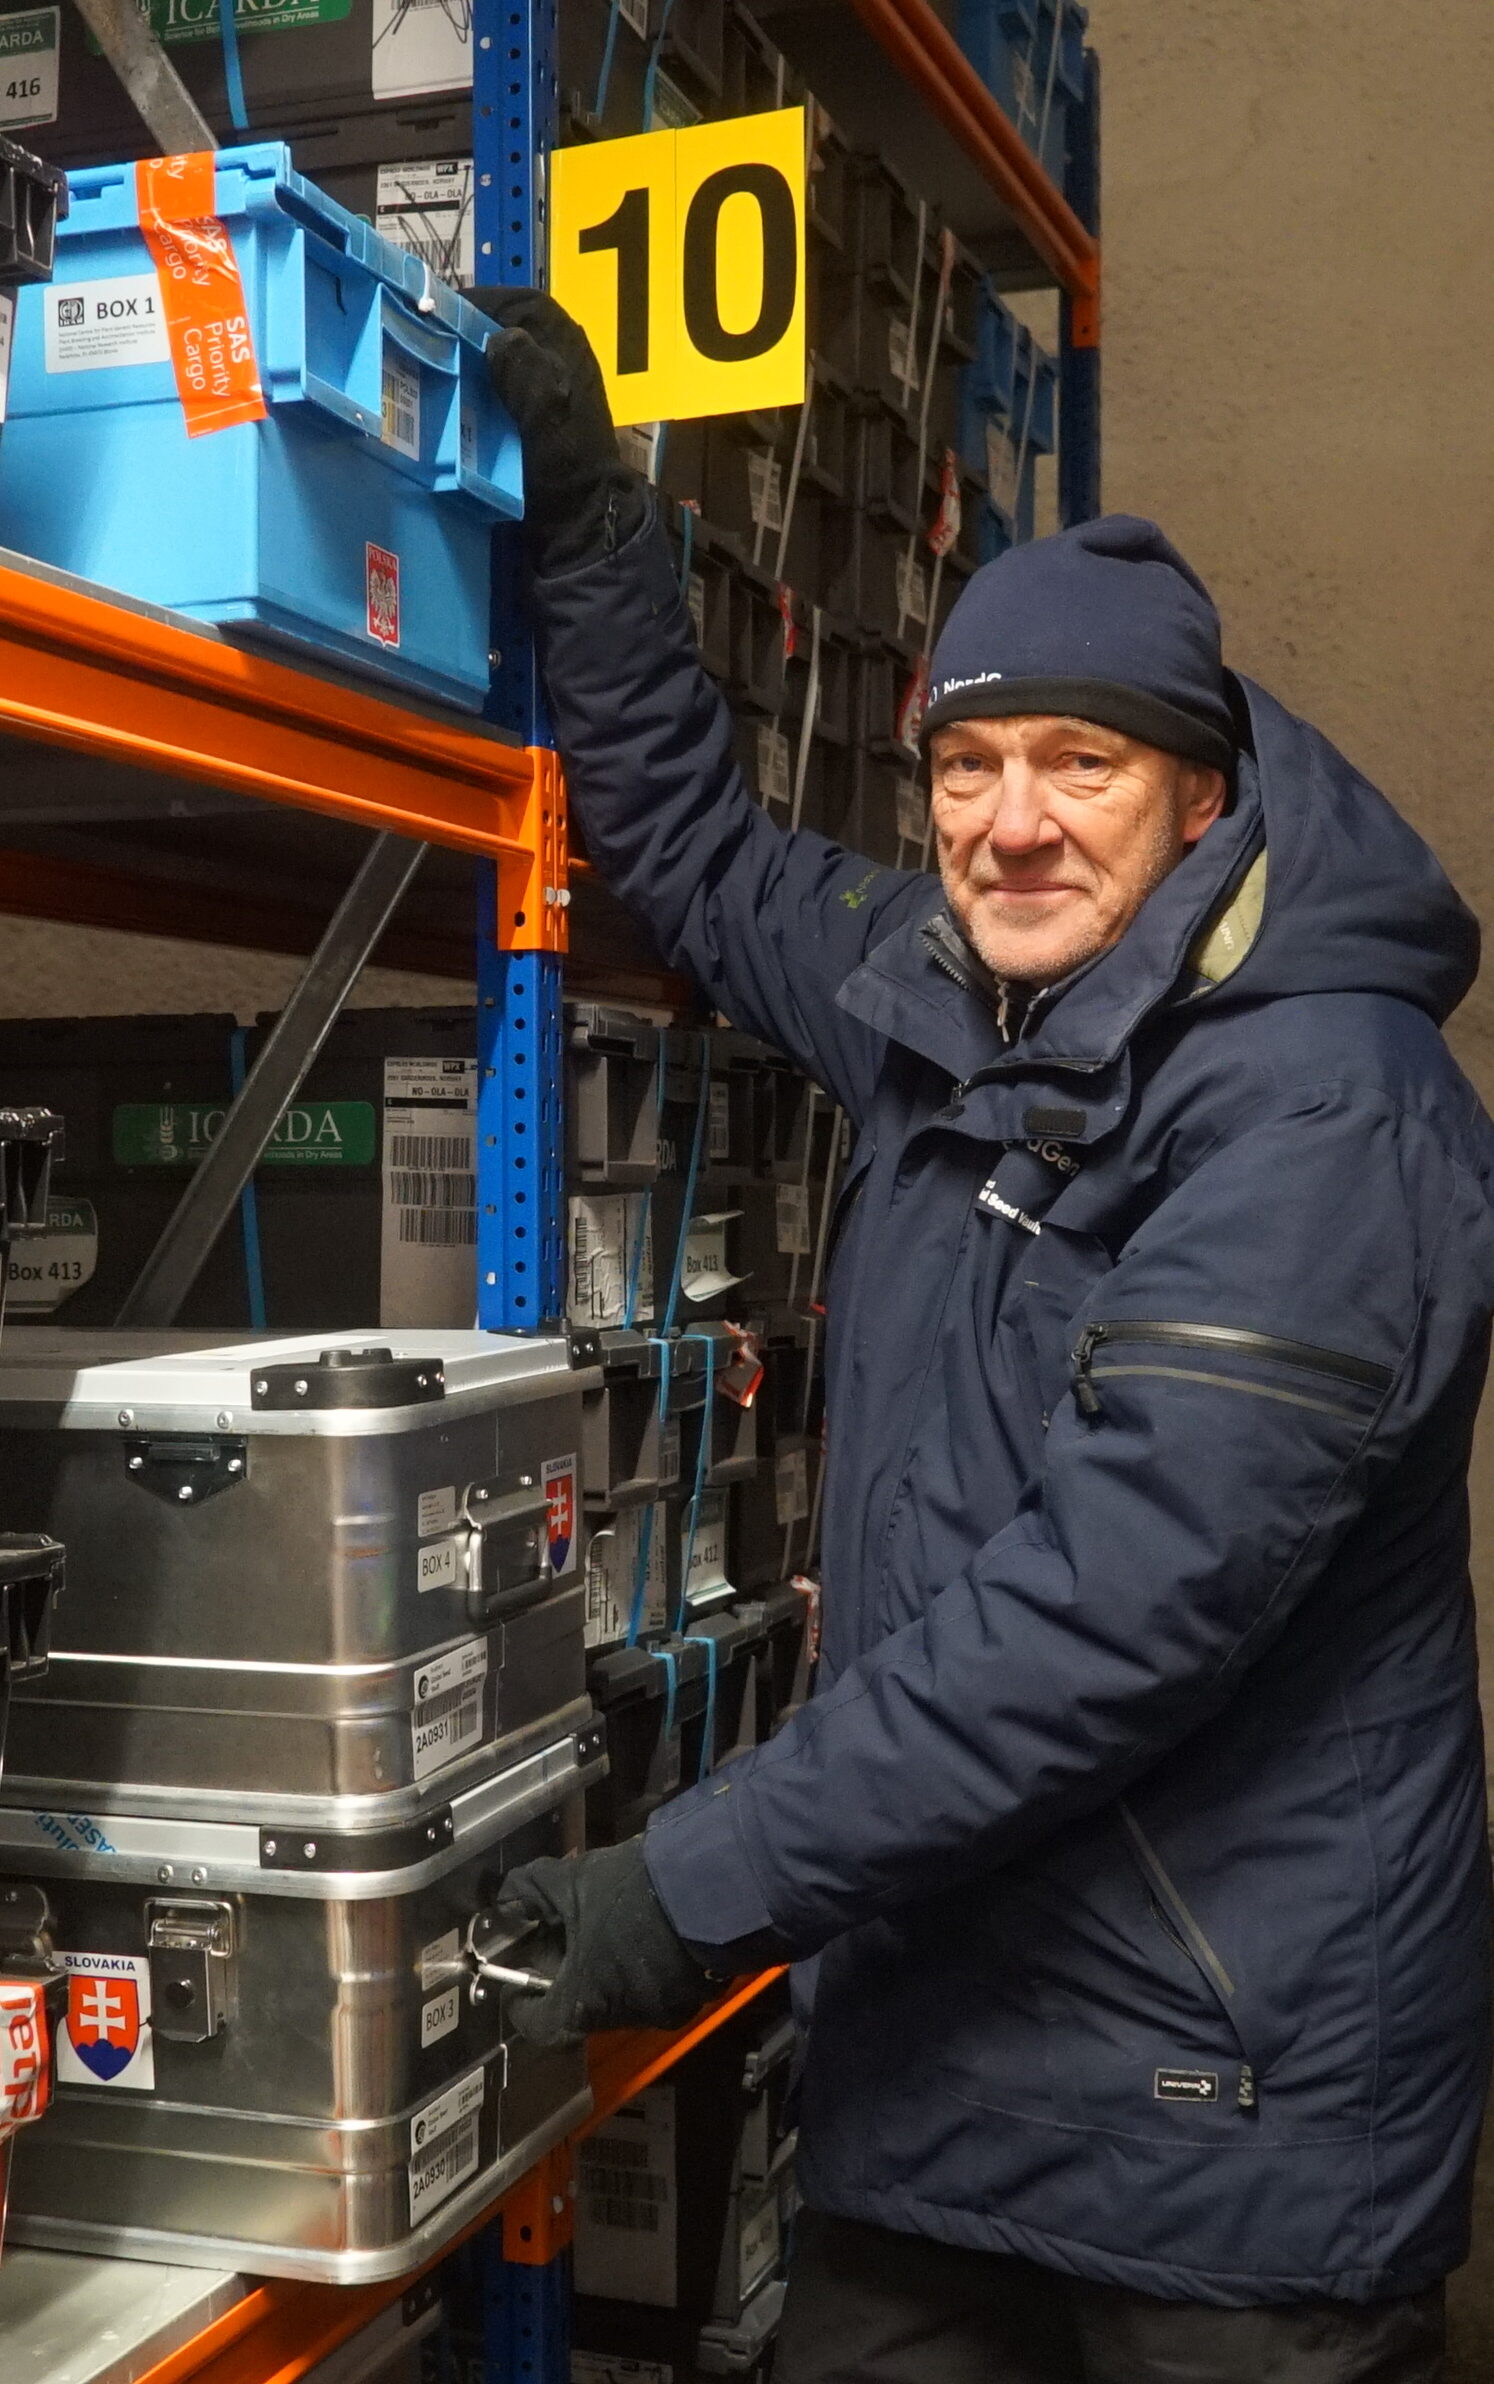 Åsmund Asdal, Seed Vault Coordinator at NordGen after putting the boxes from Poland and Slovakia at the shelves inside the Seed Vault.